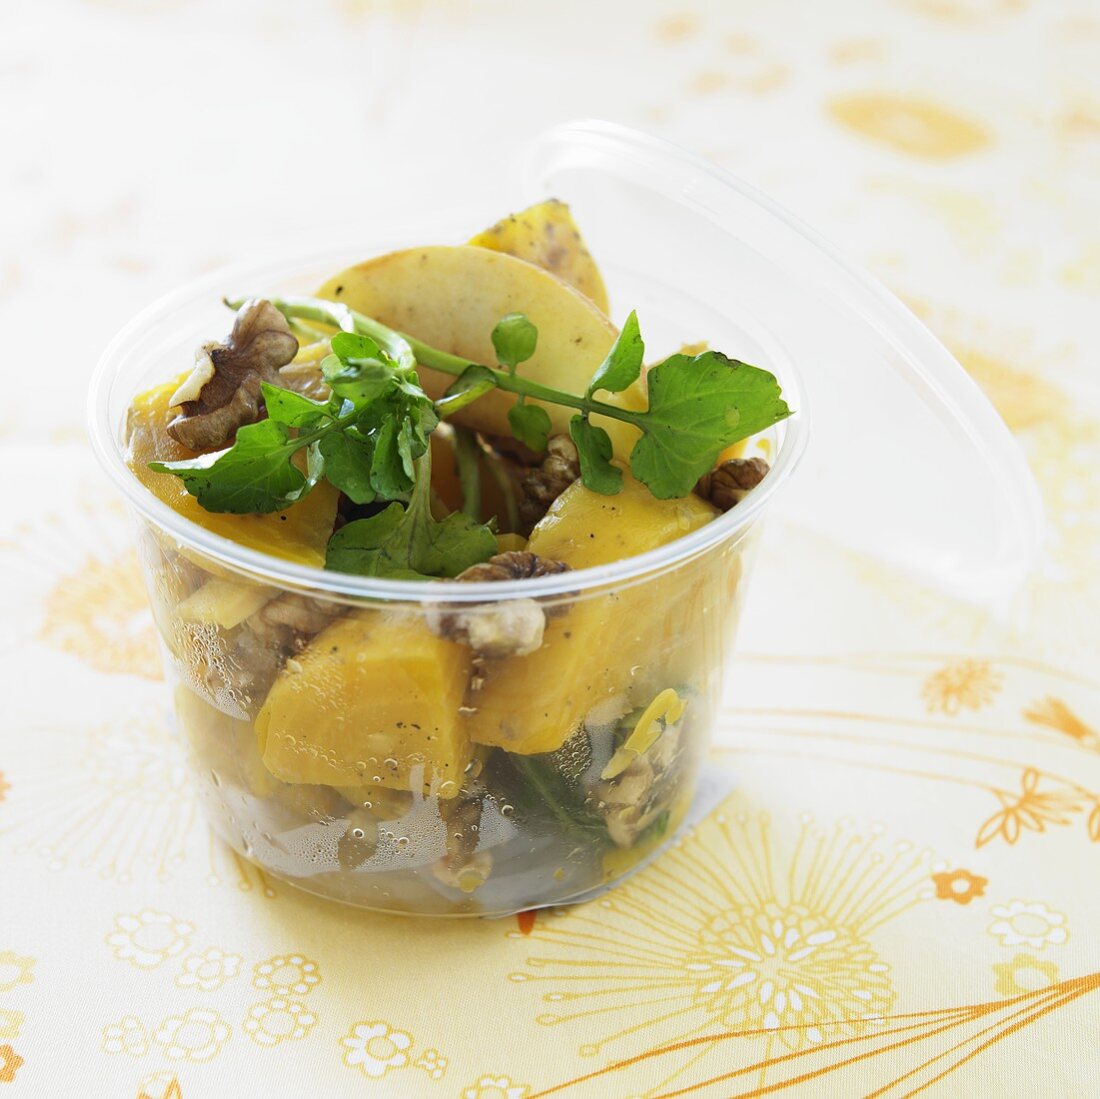 Golden Beet Salad with Walnuts and Greens in a Plastic Container